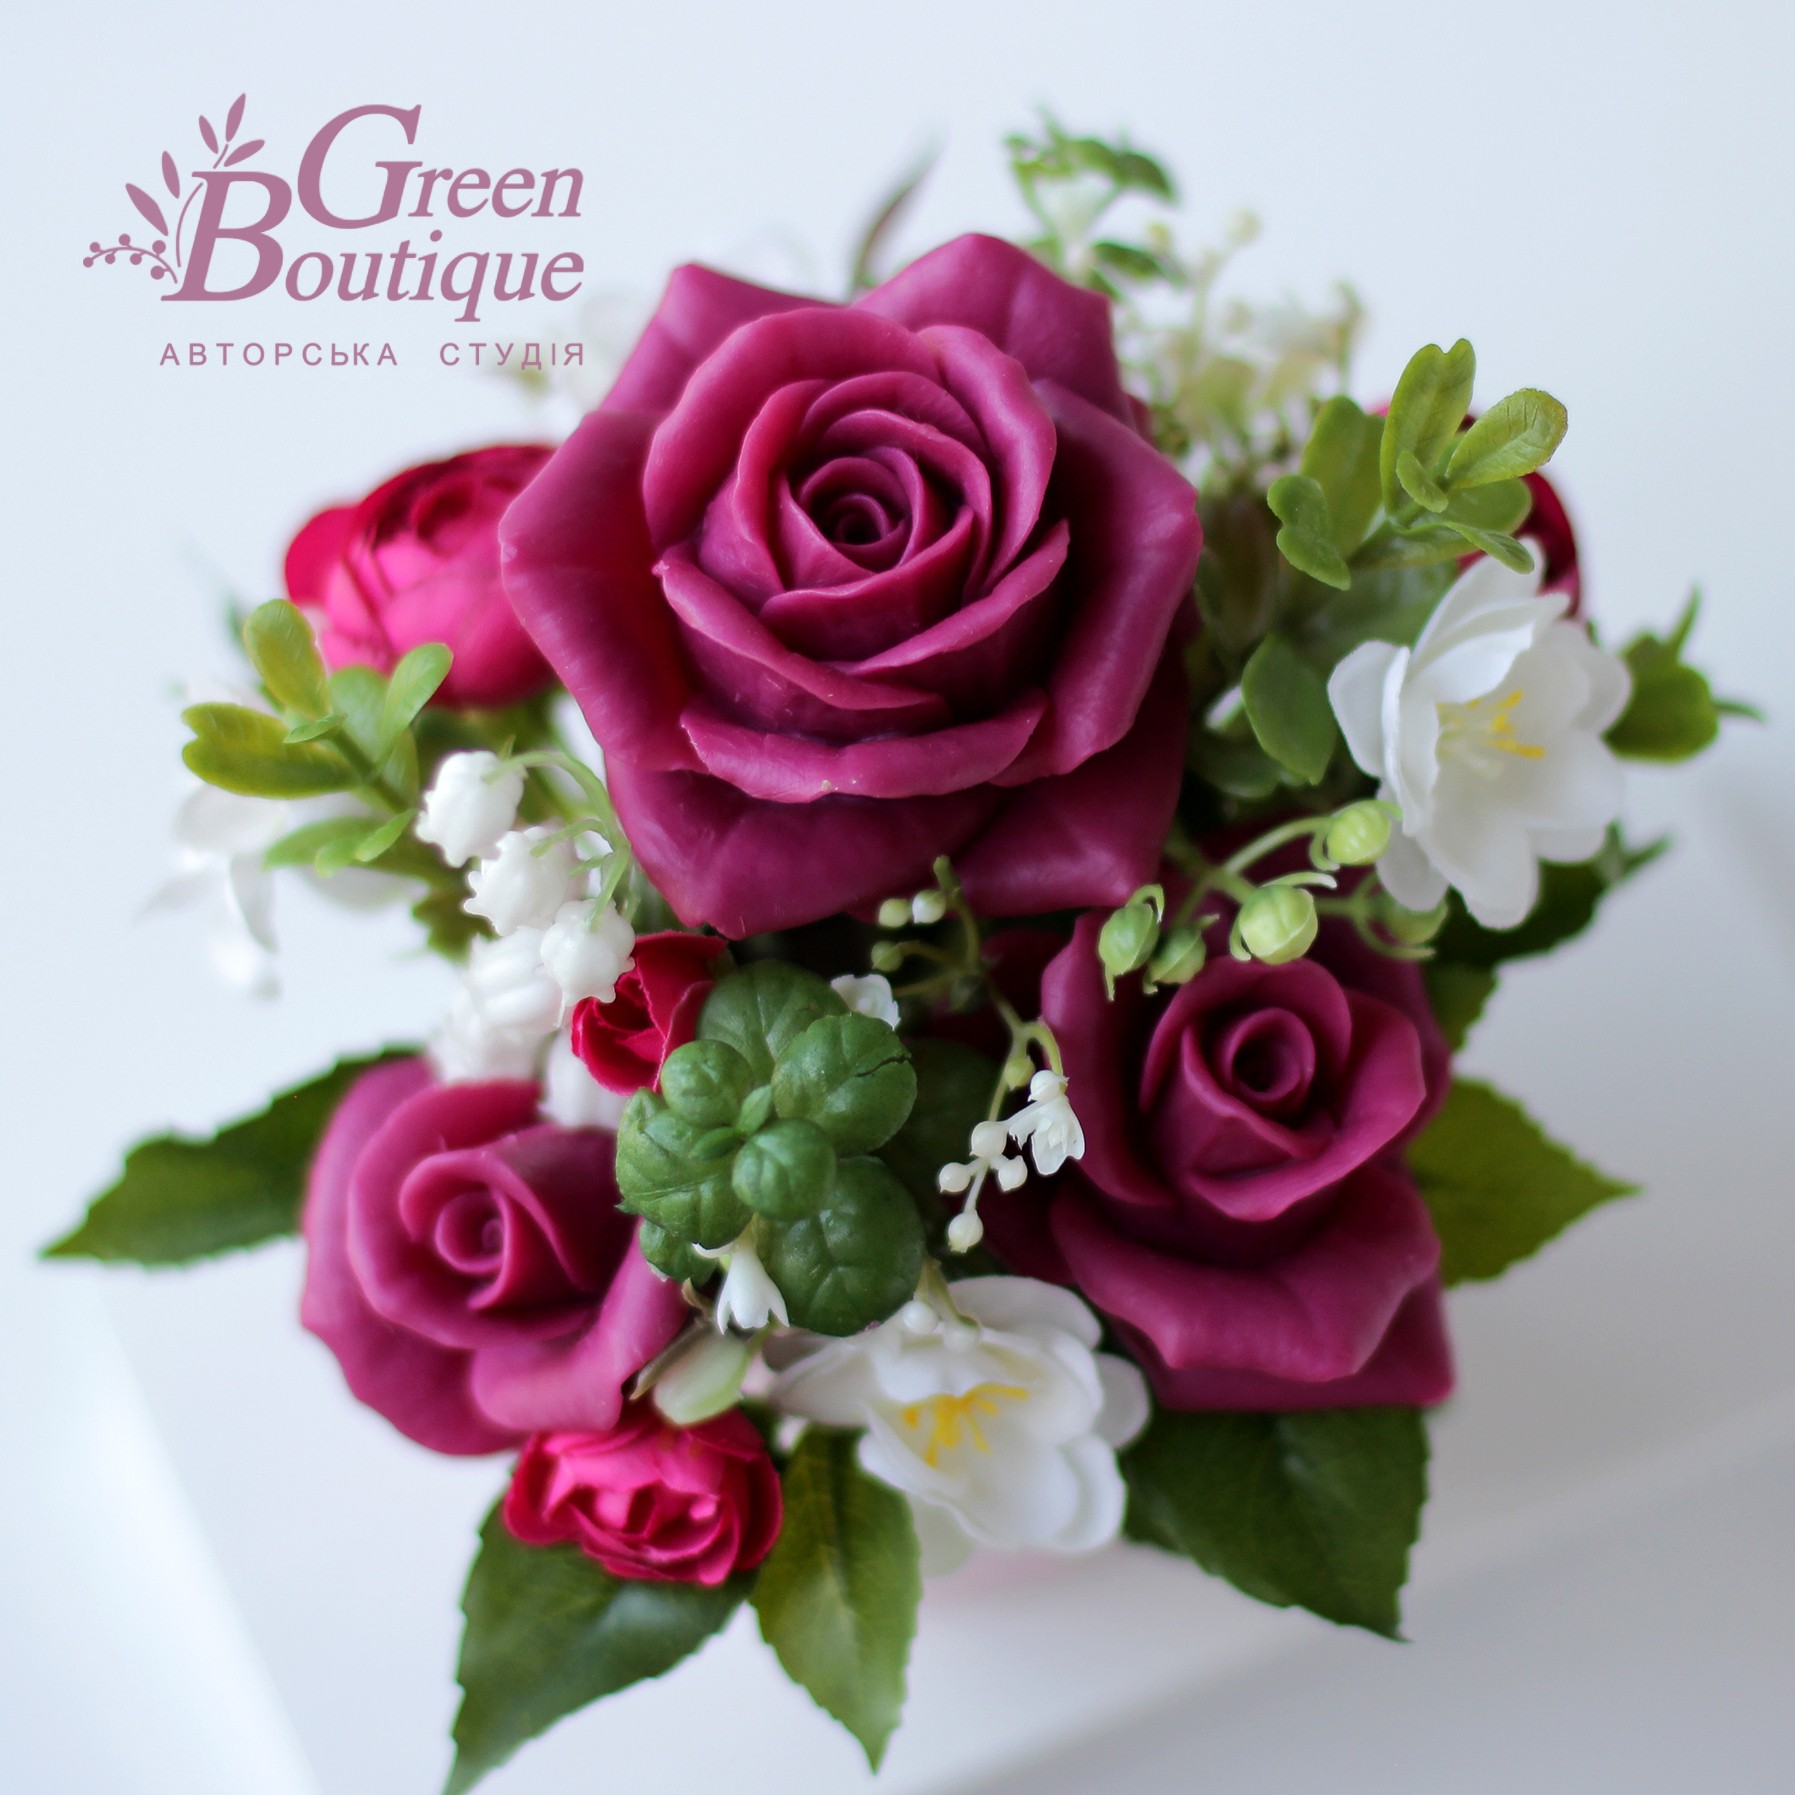 Interior bouquet of soap, cherry roses with lilies of the valley and cherry blossoms